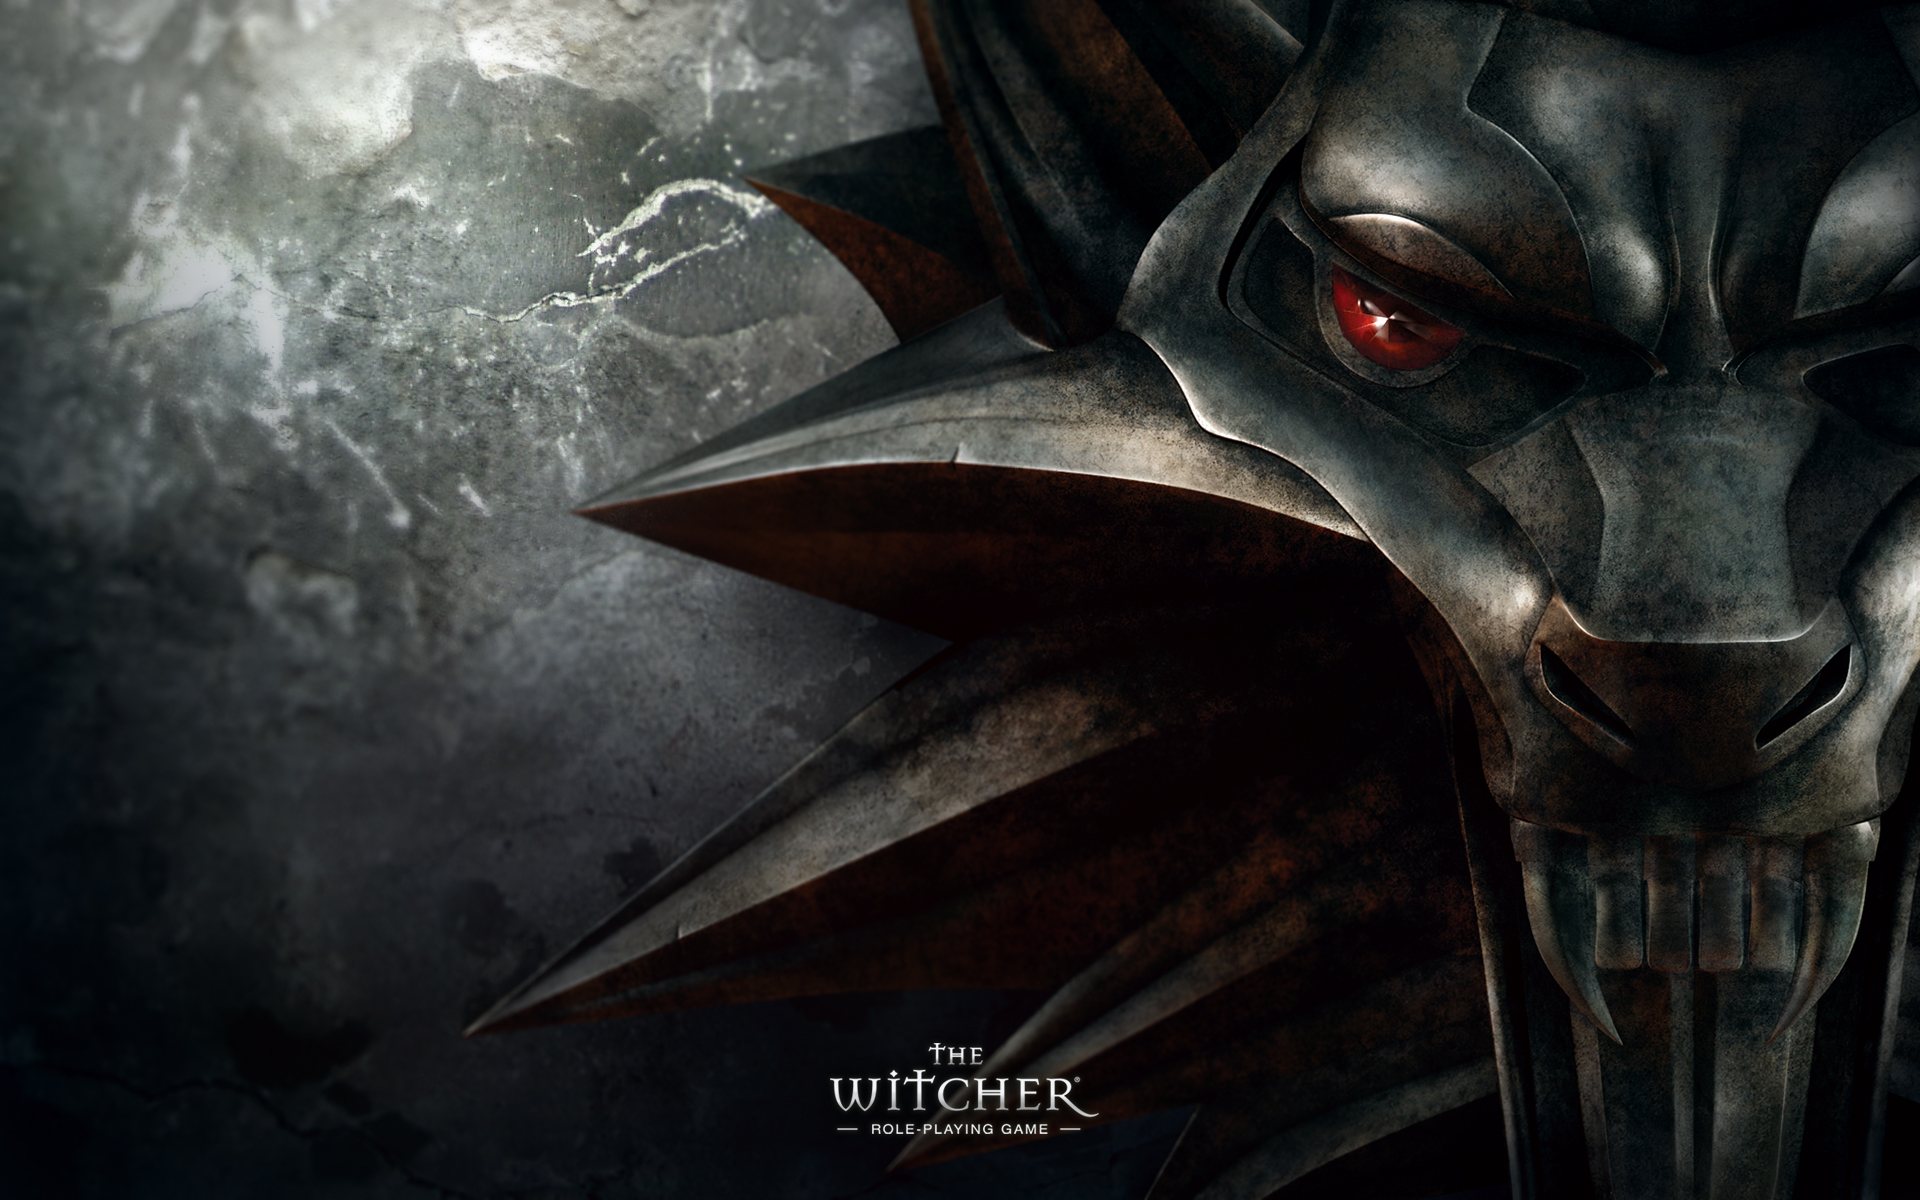 The Witcher Wallpapers the witcher hd wallpaper Wallpapereorg 1920x1200